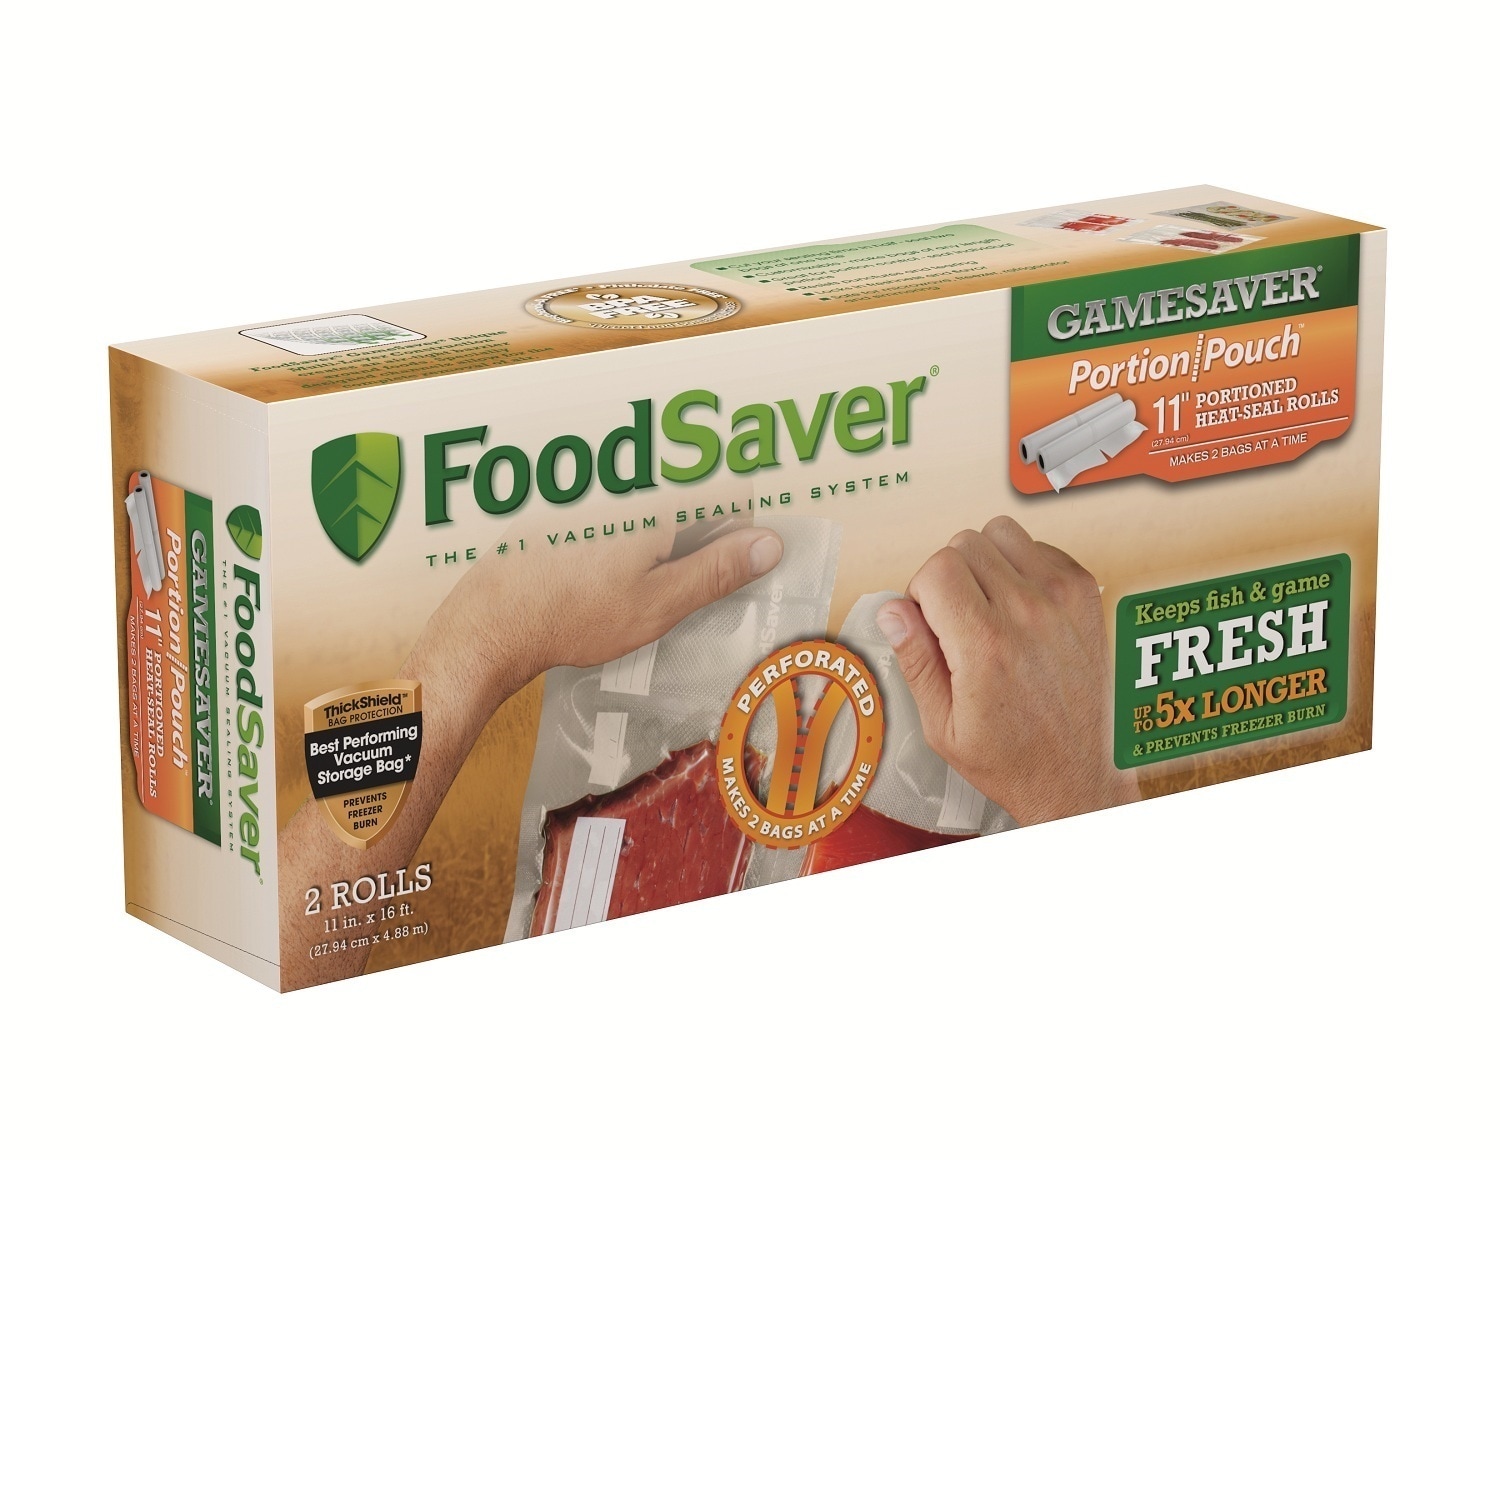 Foodsaver GameSaver 11Inx16Ft Portion Pouch Heat-Seal 2 Pack